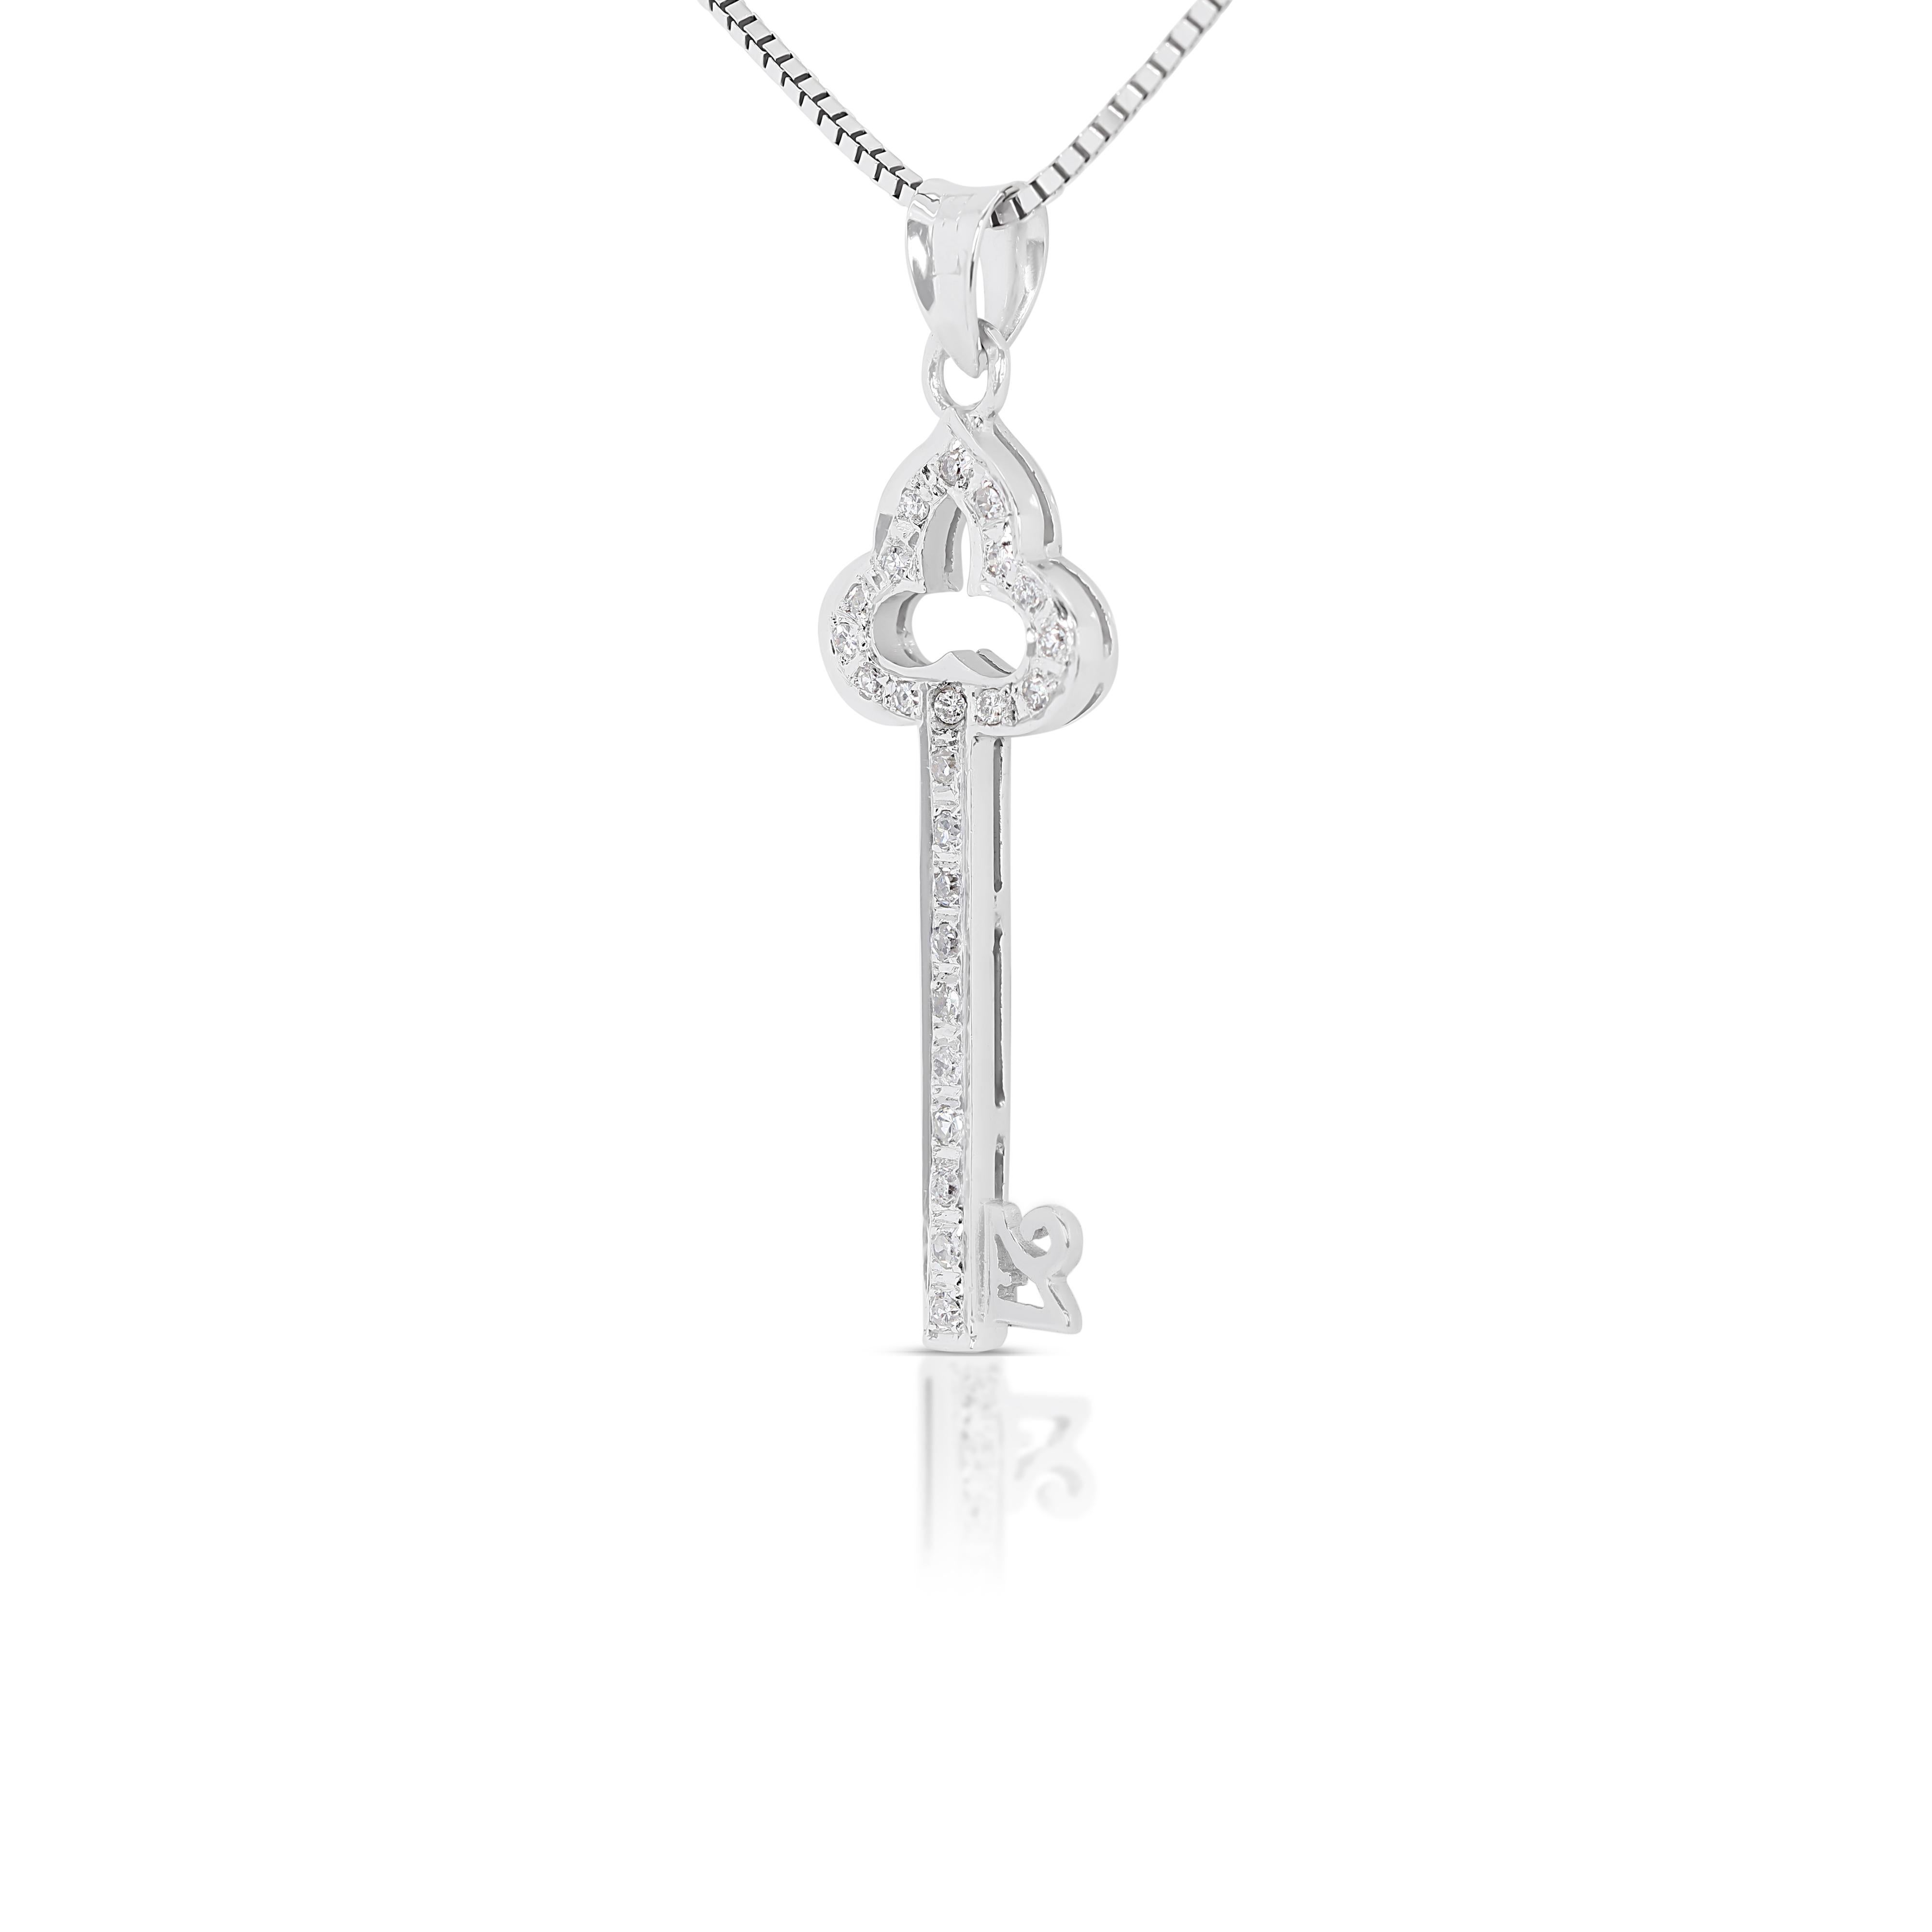 Lovely 0.23ct Diamonds Pendant in 9K White Gold (Chain not Included) In Excellent Condition For Sale In רמת גן, IL